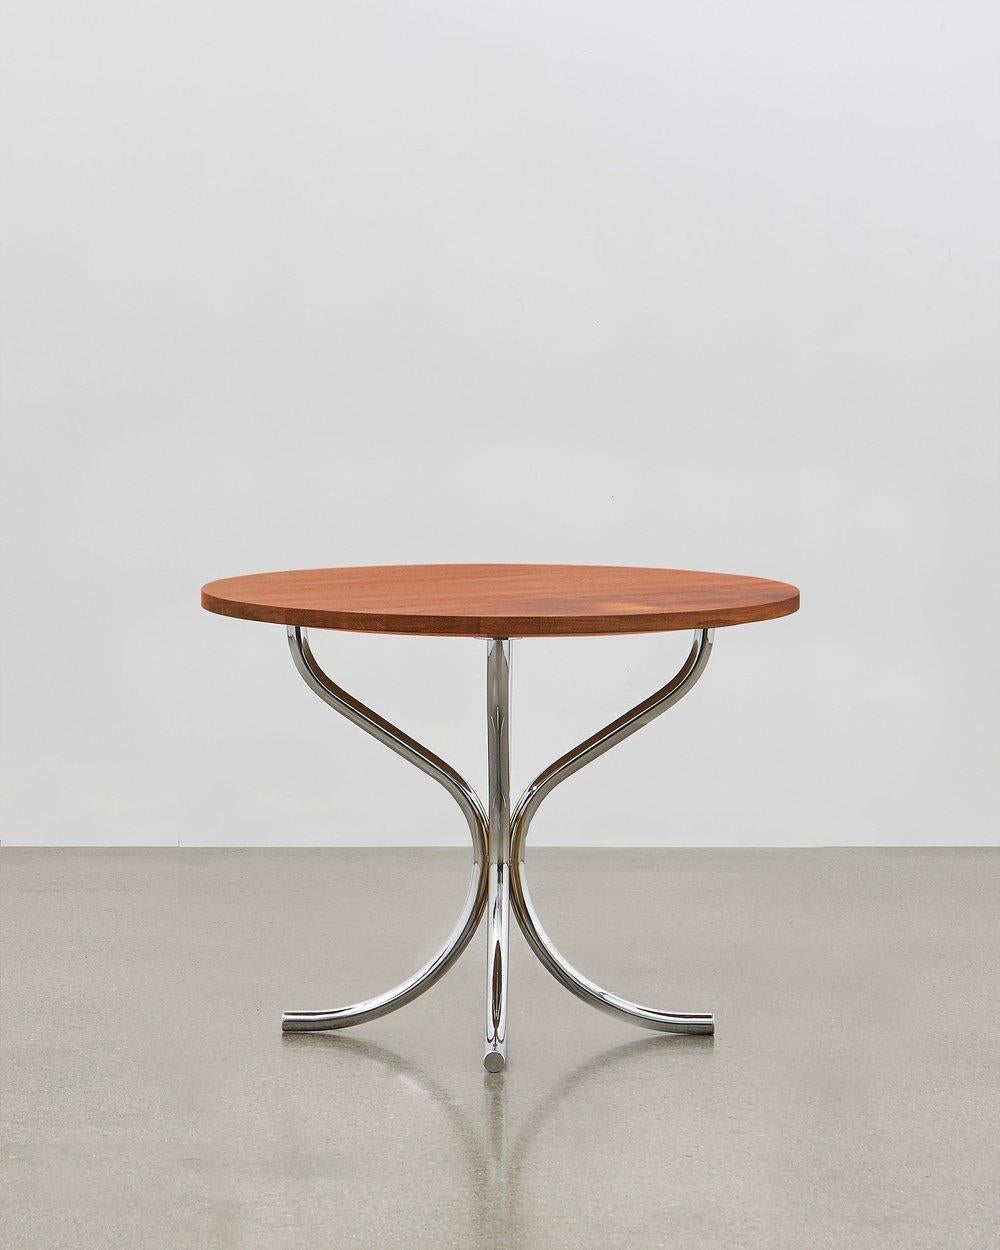 The PH Lounge Table designed by Poul Henningsen is the perfect addition to any lounge space where a table is required to gather around or for display. Taller than a low coffee table, the PH Lounge Table lends itself to a wide variety of settings,